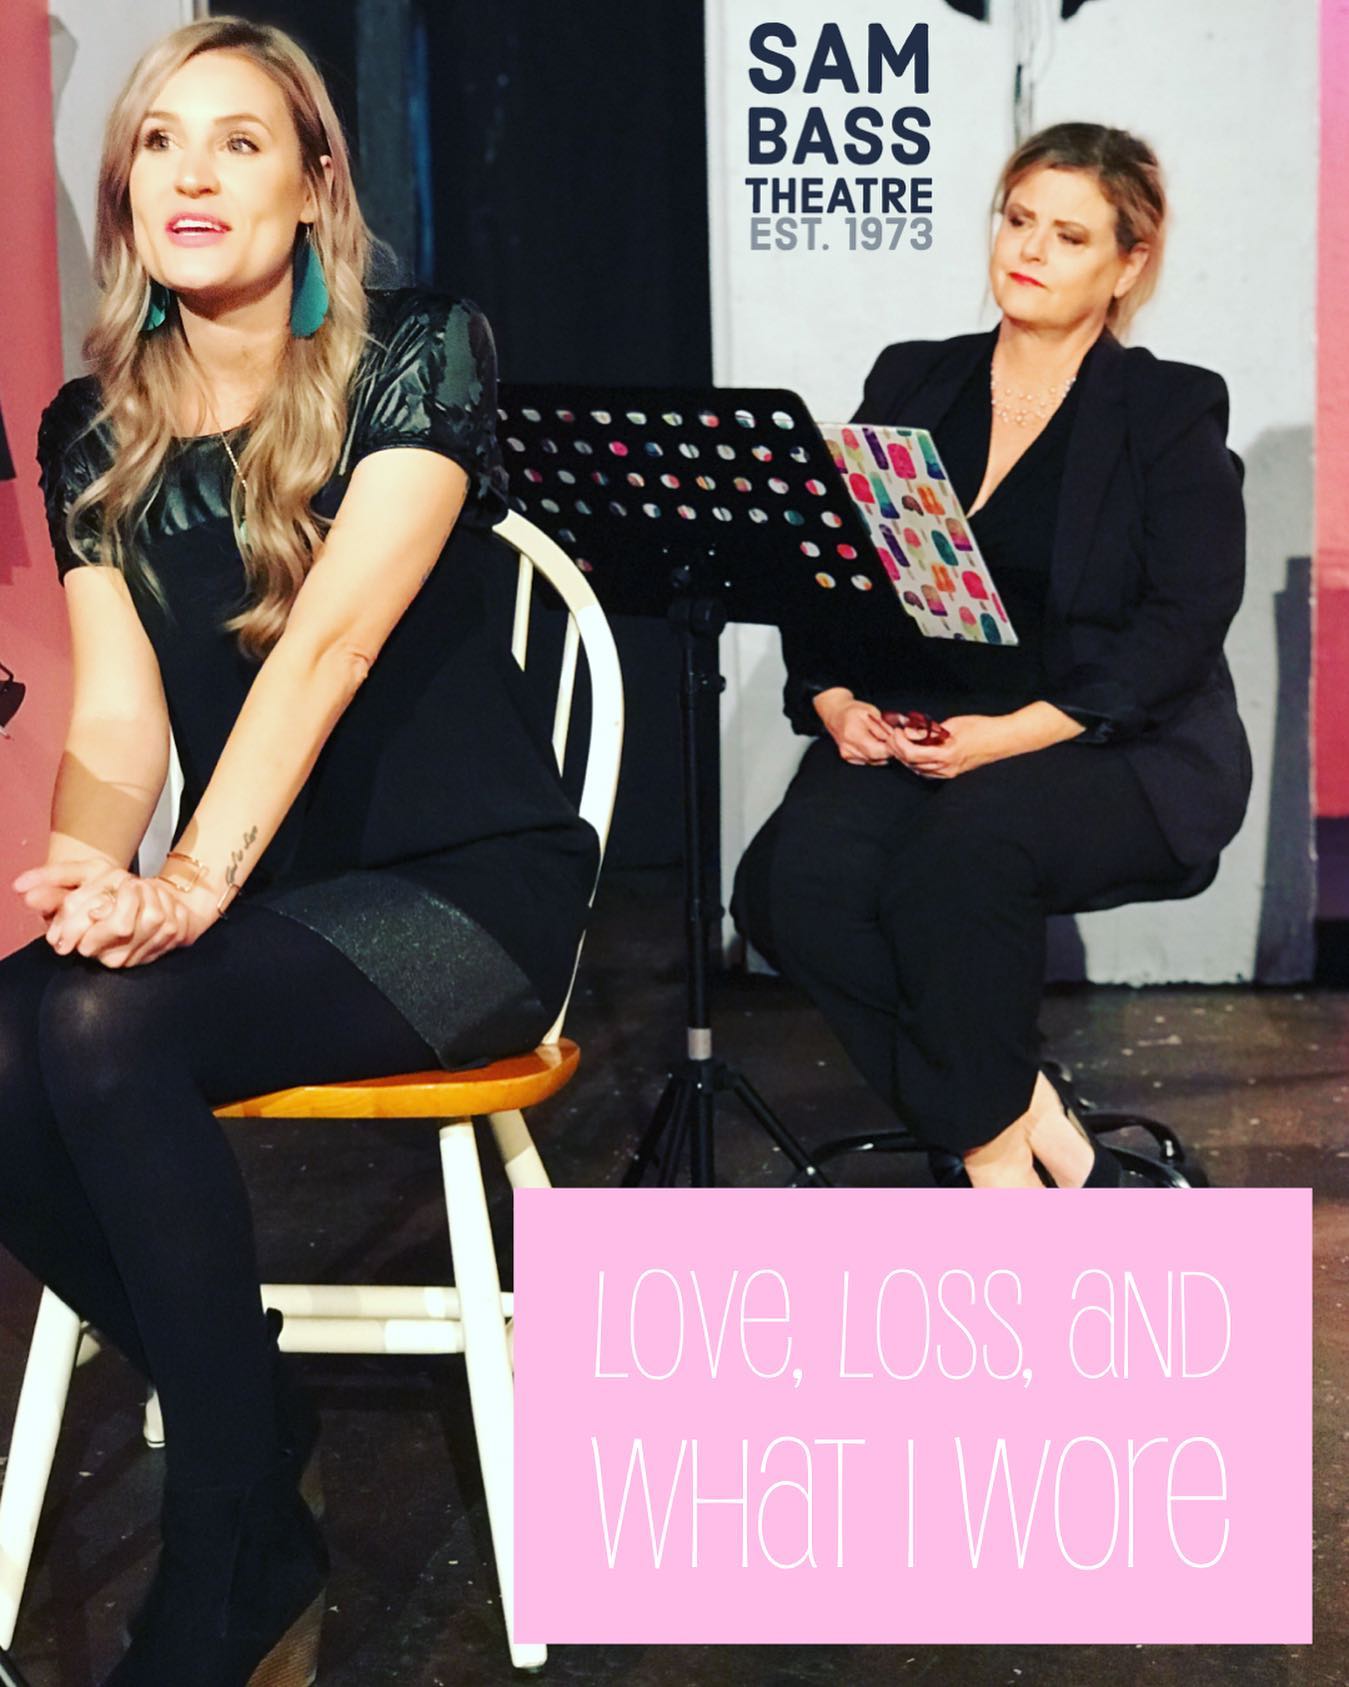 Love, Loss and What I Wore by Sam Bass Community Theatre